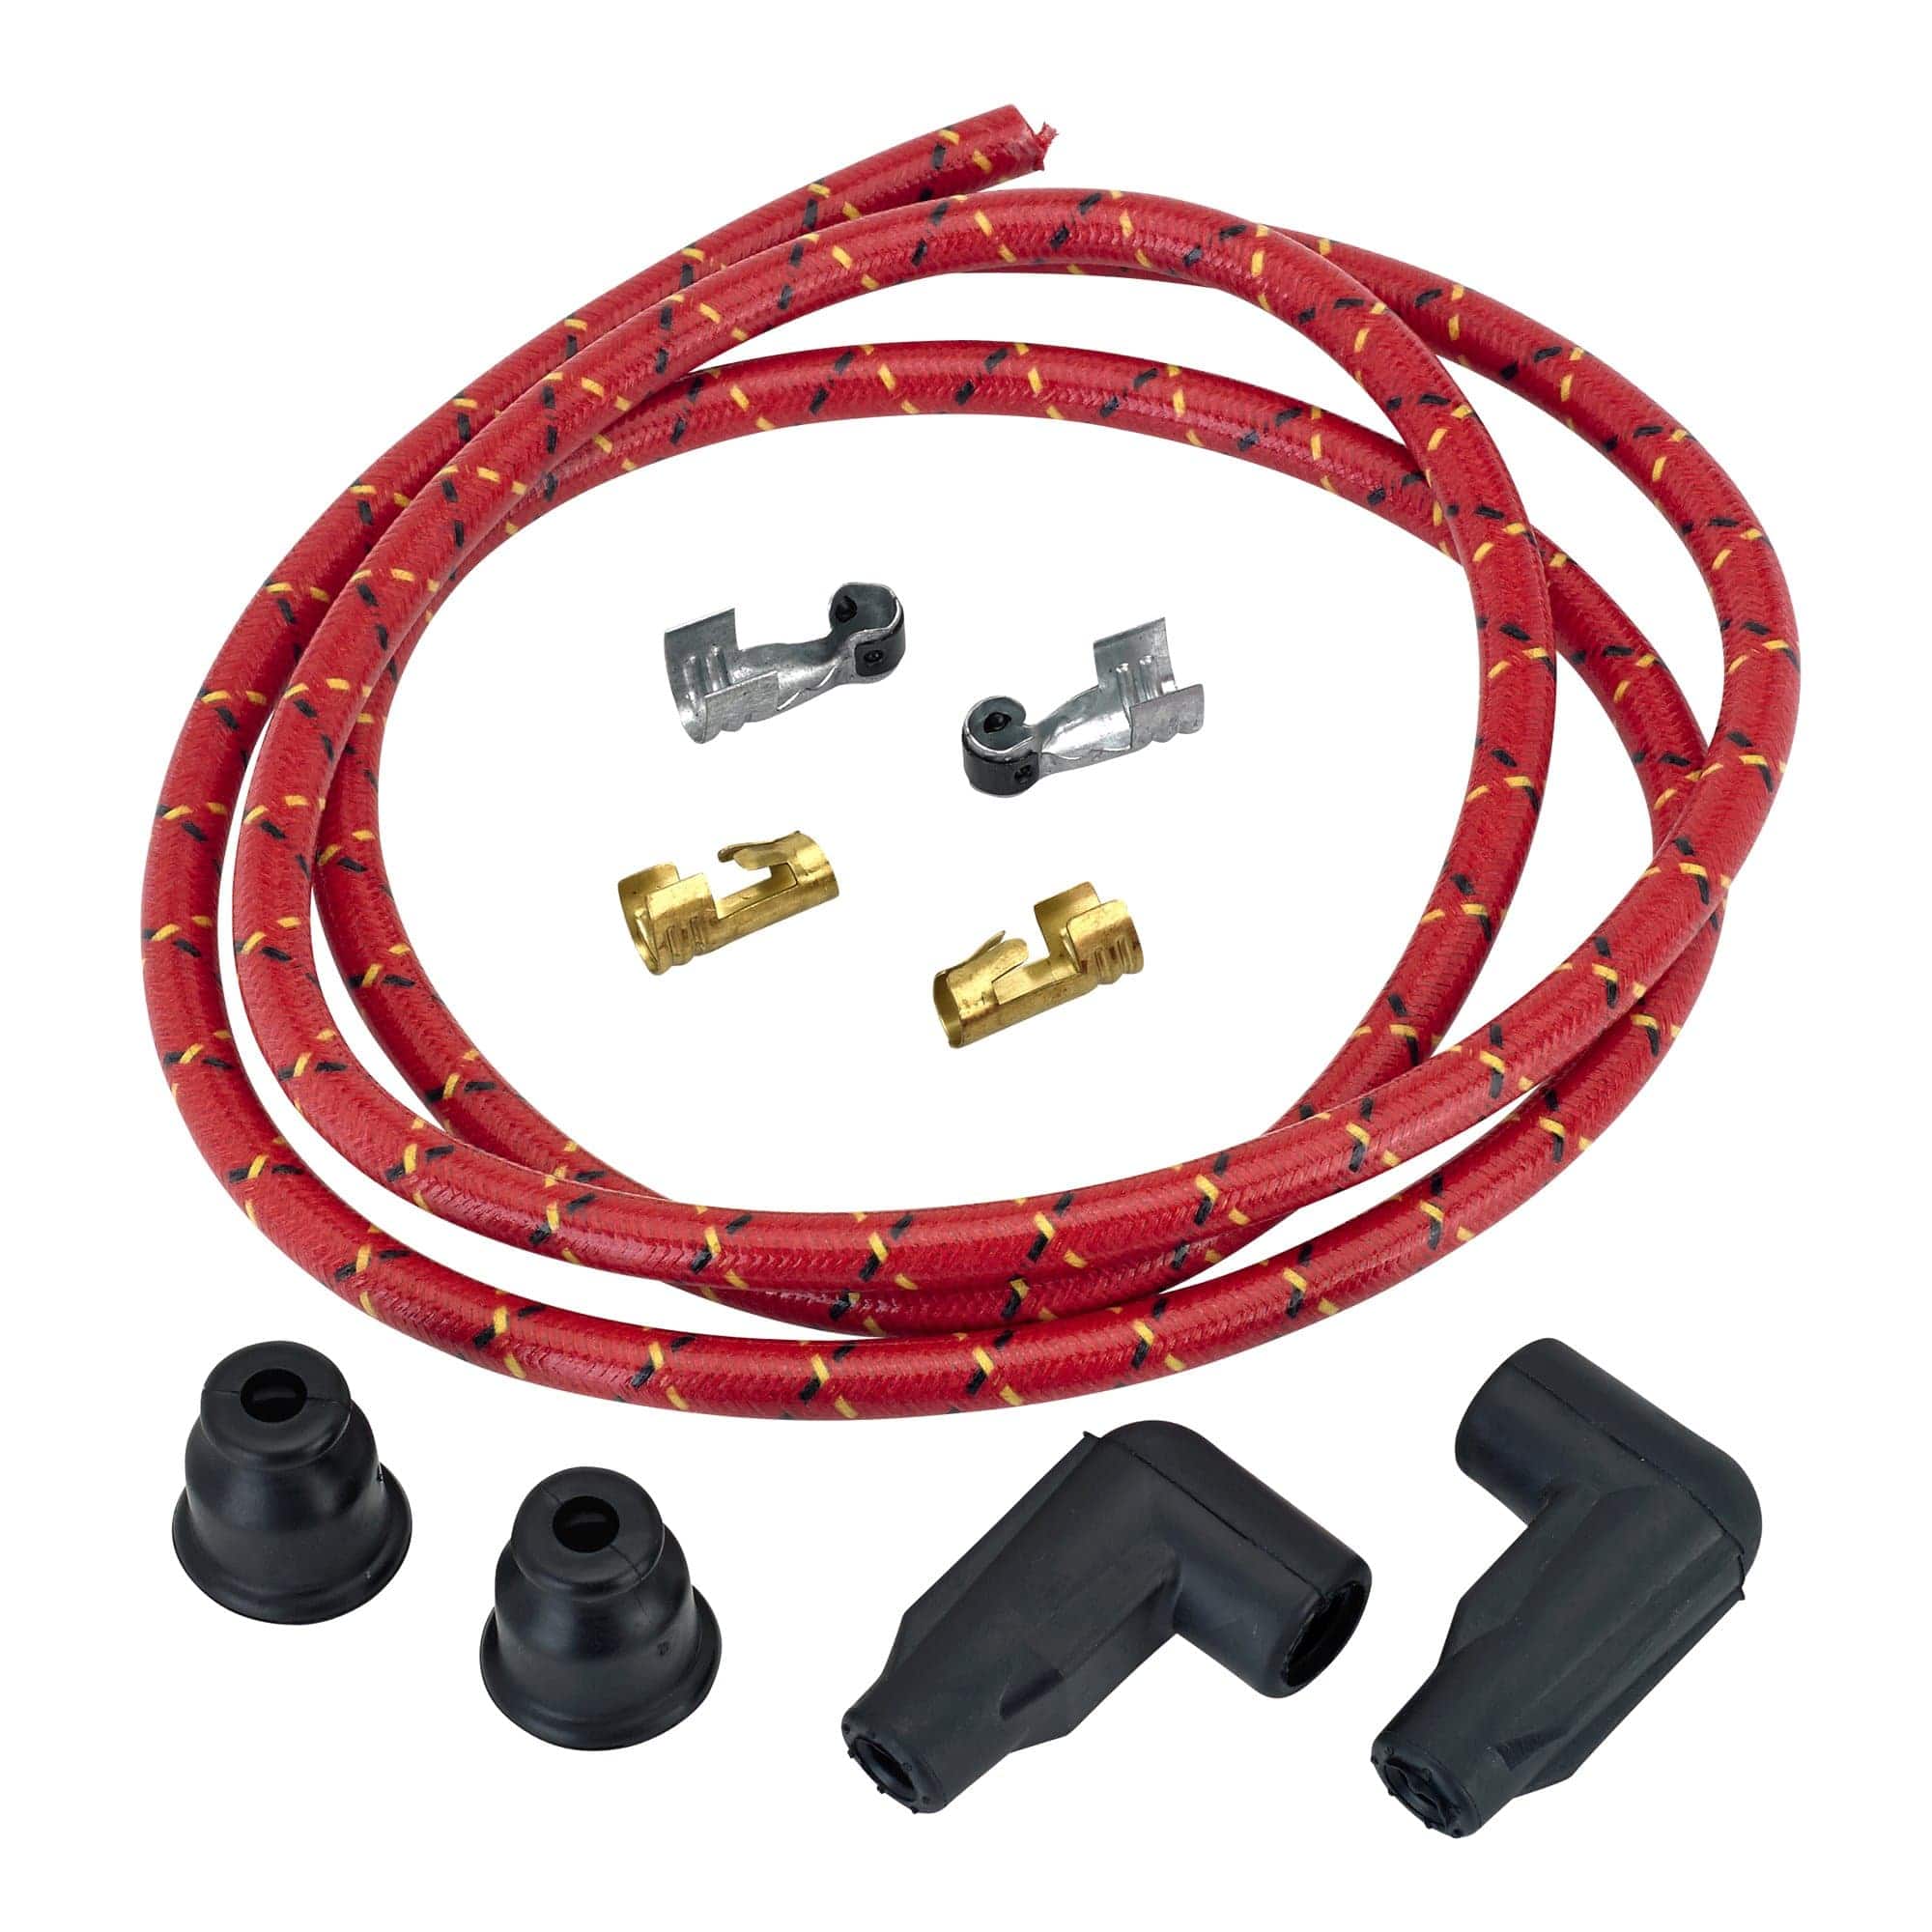 https://www.lowbrowcustoms.com/cdn/shop/products/large_3675_lowbrow-customs-8-mm-supressor-core-spark-plug-wire-kit-red-black-yellow-tracers_1_2000x.jpg?v=1622524556